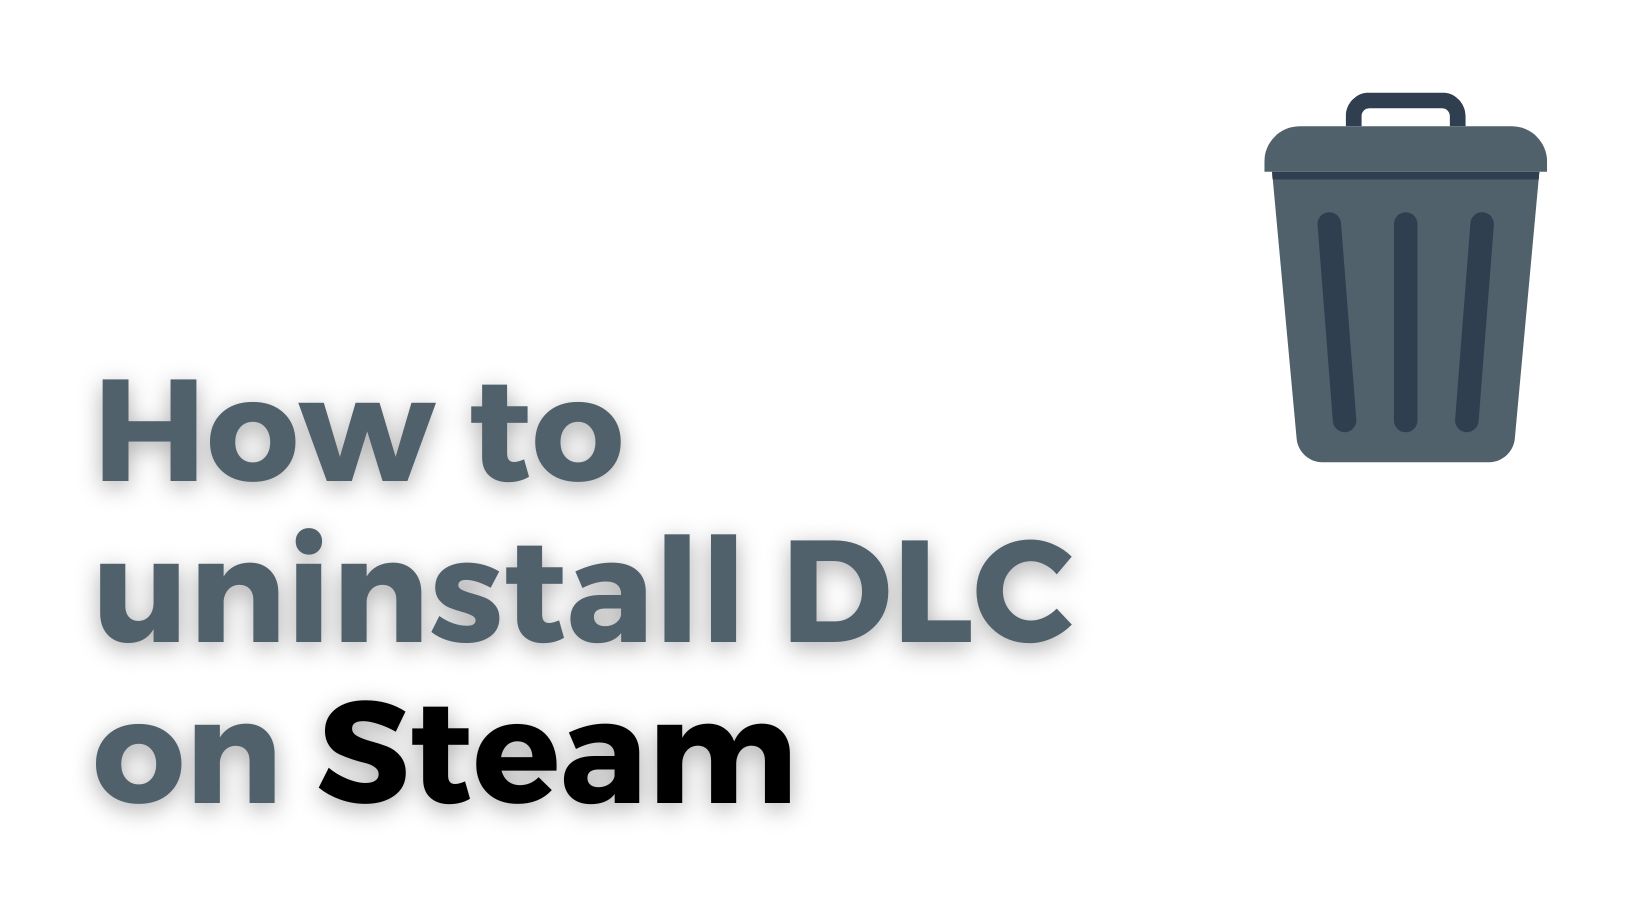 How to uninstall DLC on Steam